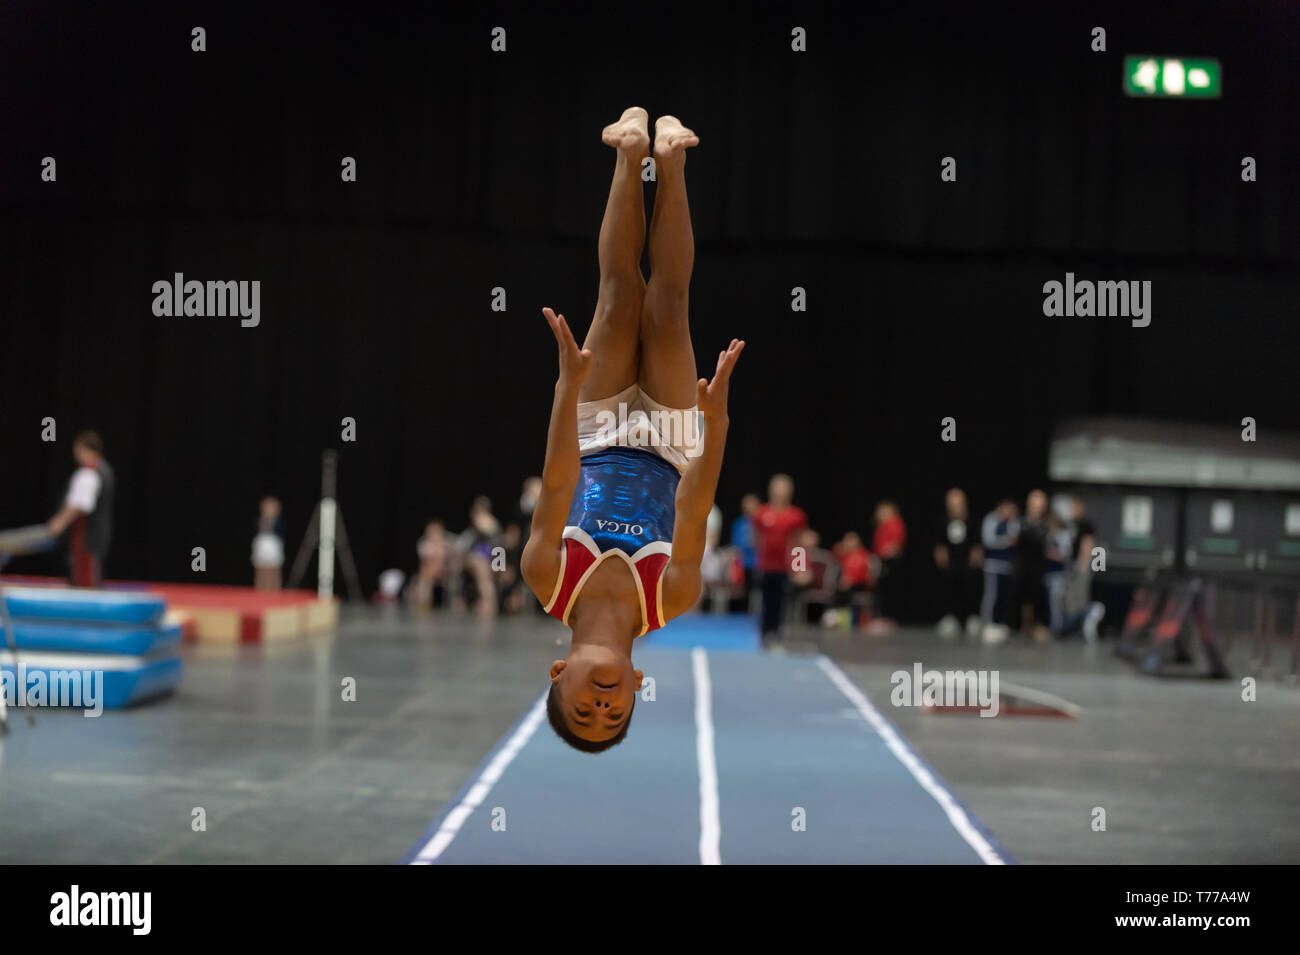 Telford, England, UK. 27 April, 2018. A male gymnast from OLGA Poole in action during Spring Series 1 at the Telford International Centre, Telford, UK. Stock Photo